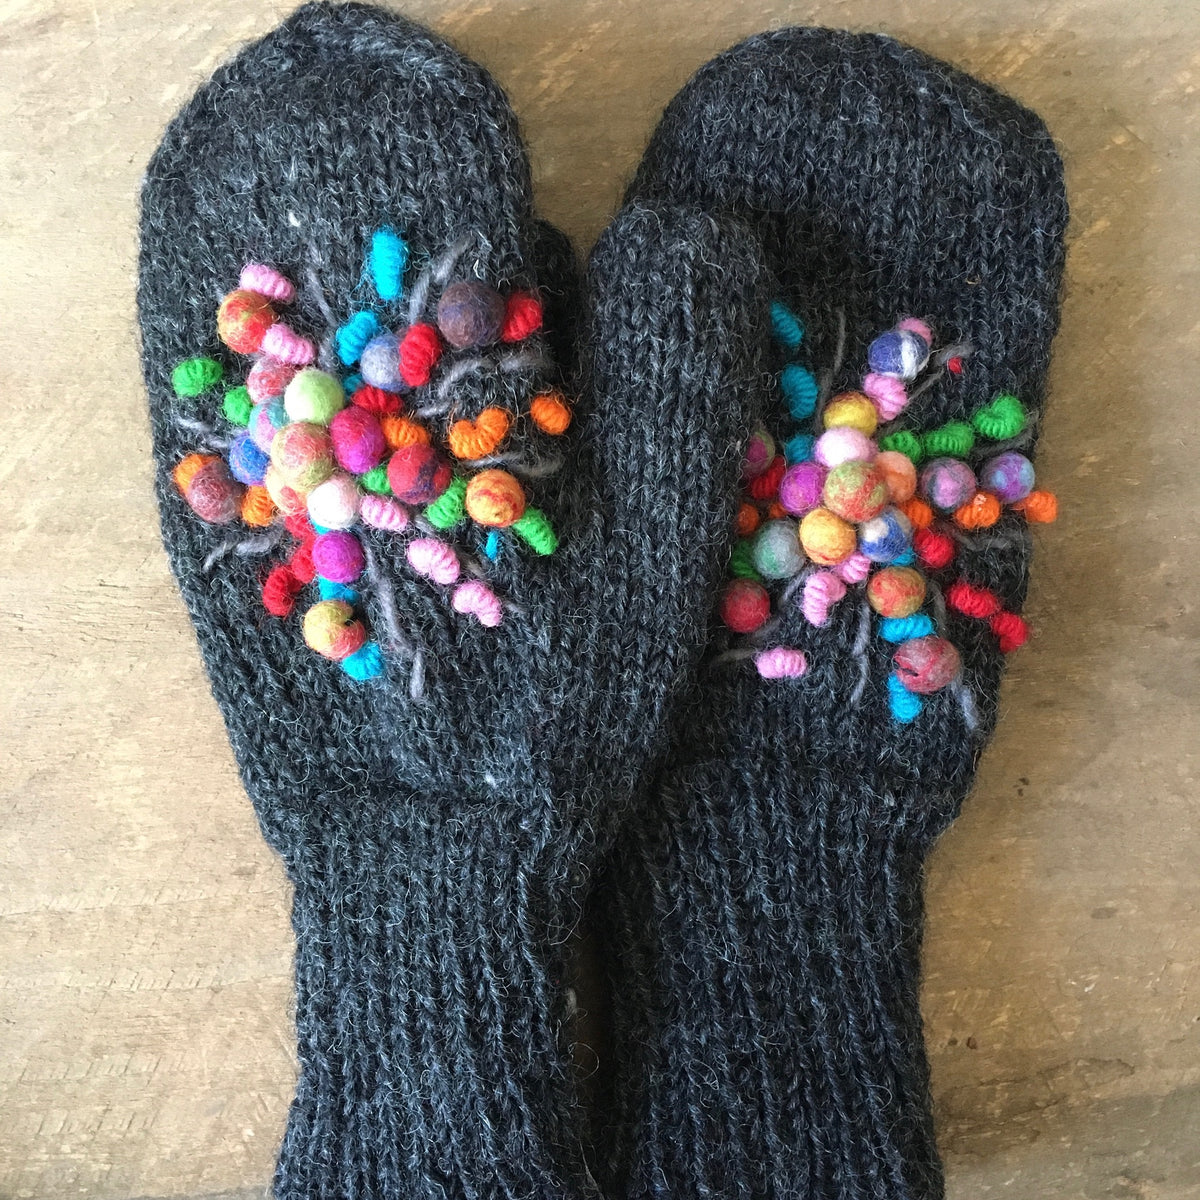 Felted Star Mittens